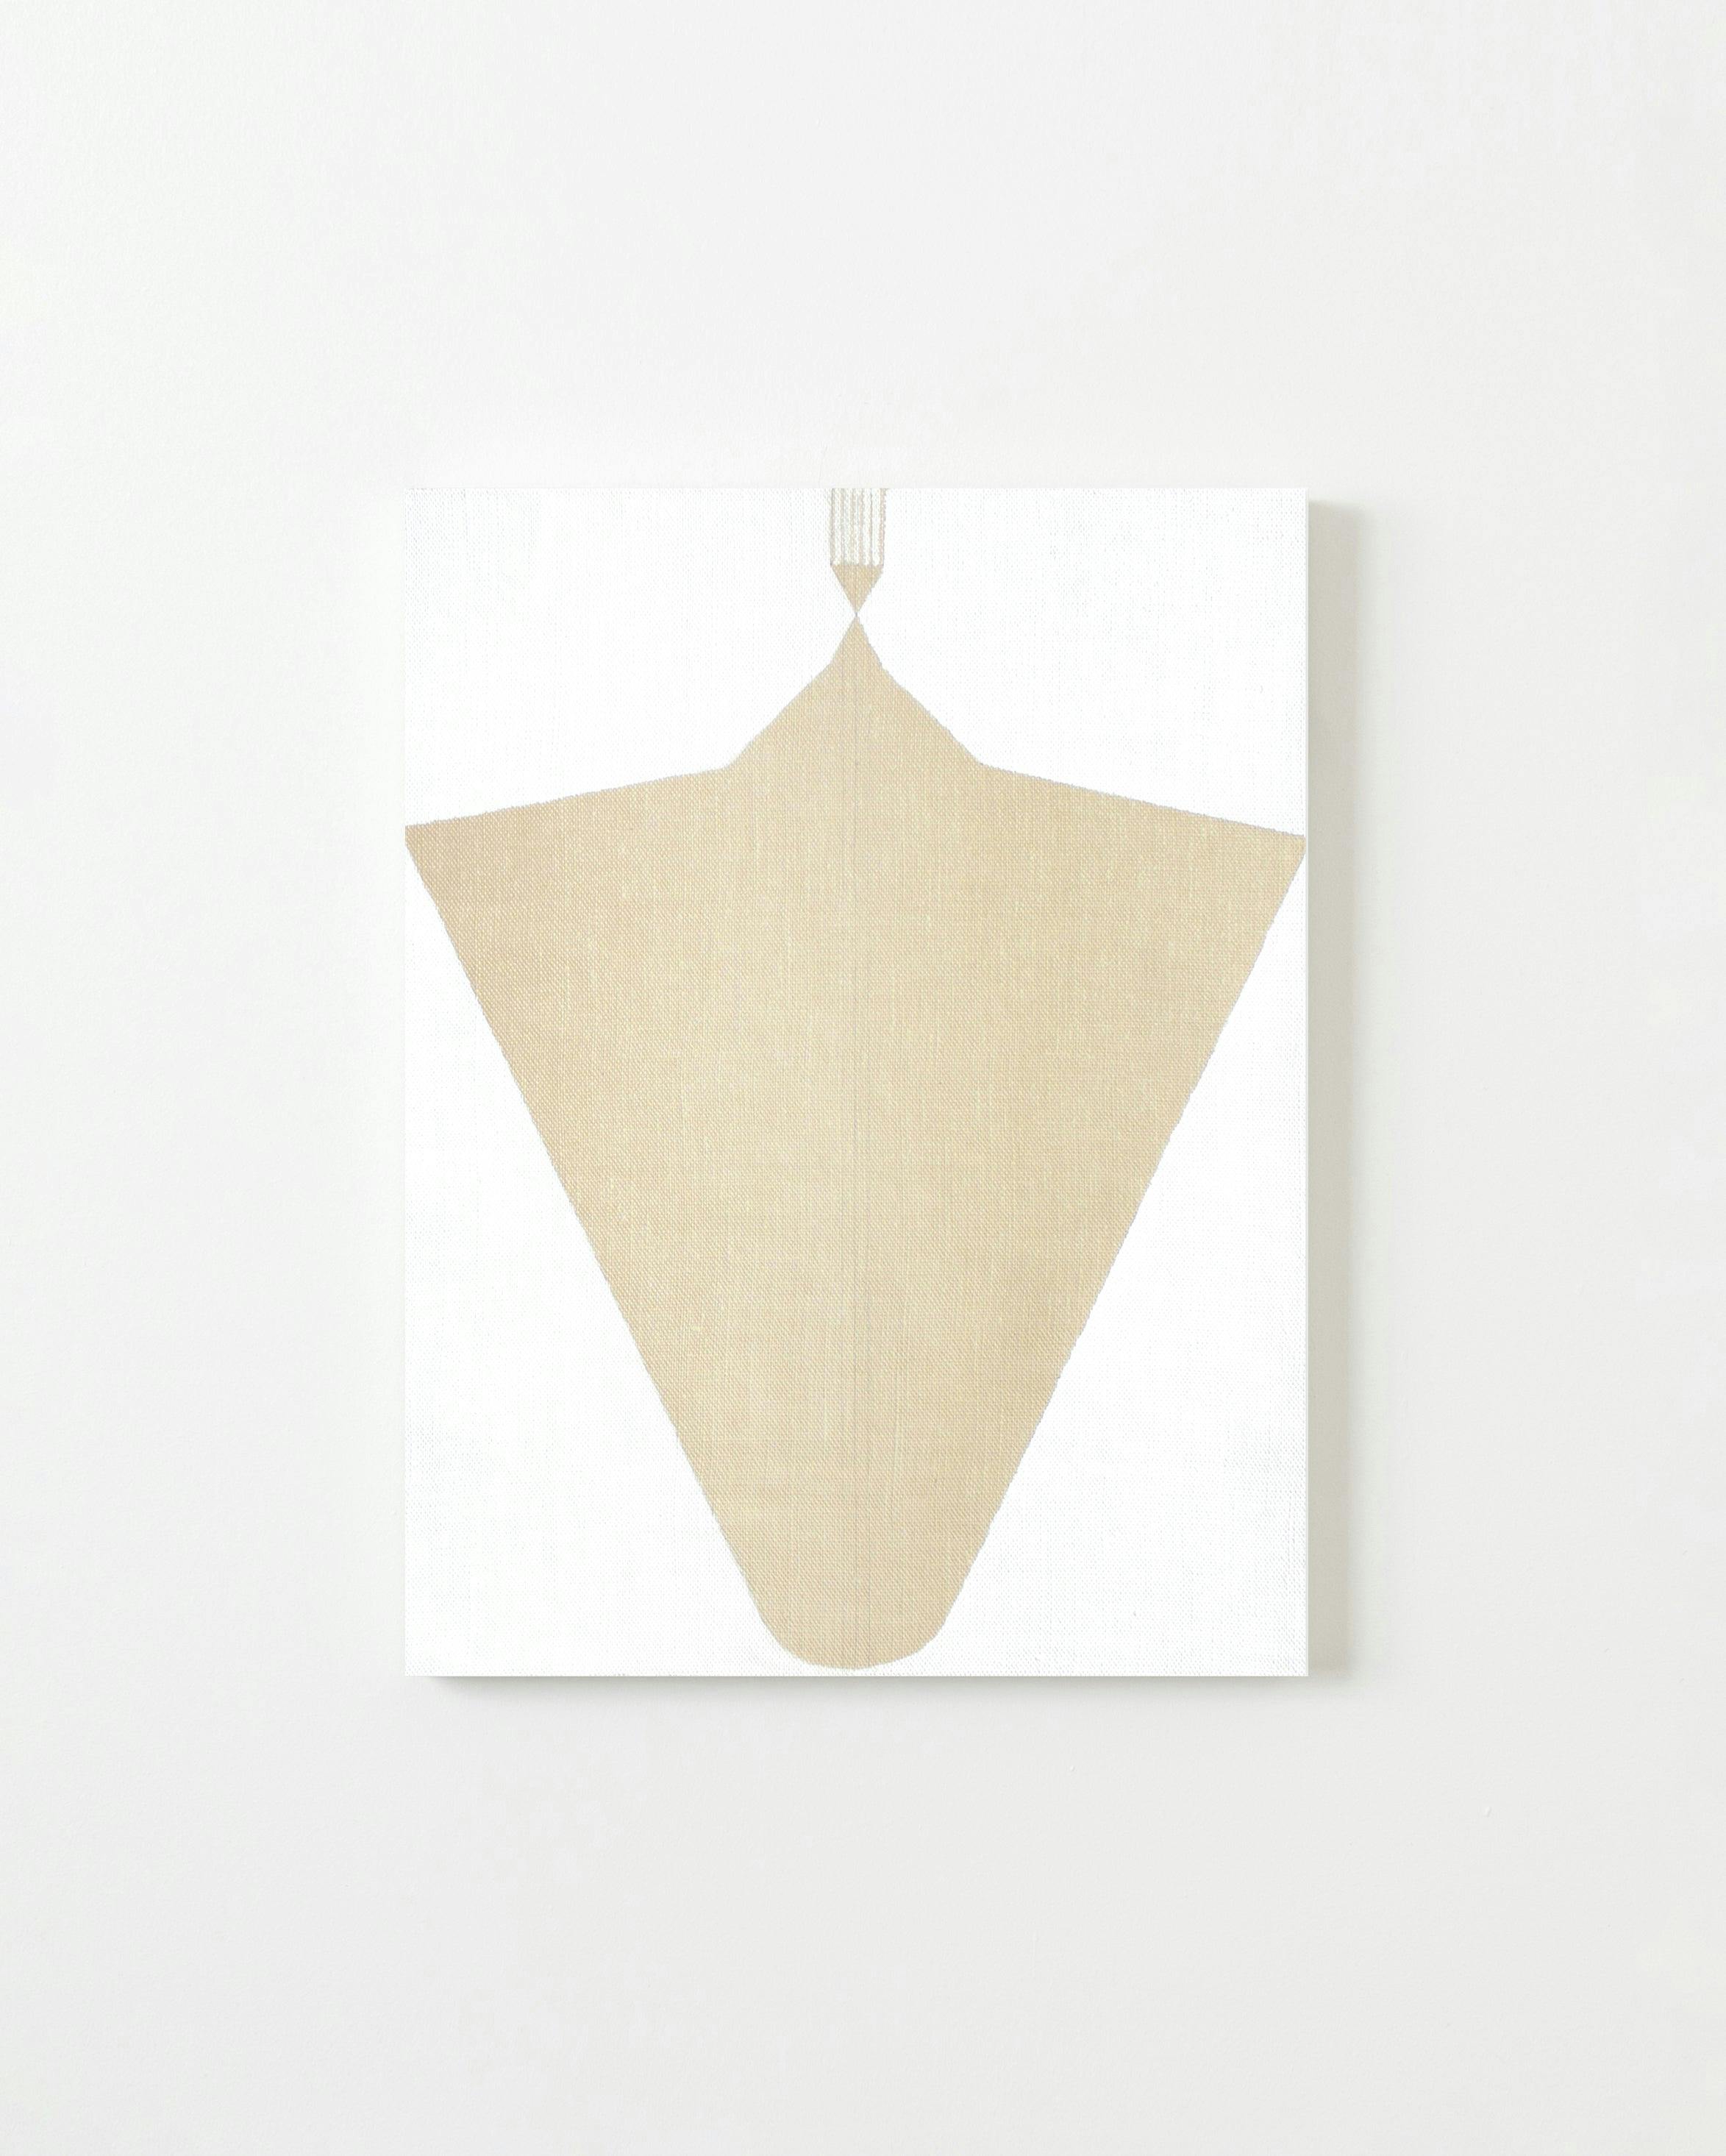 Painting by Aschely Vaughan Cone titled "Small White Ray II".